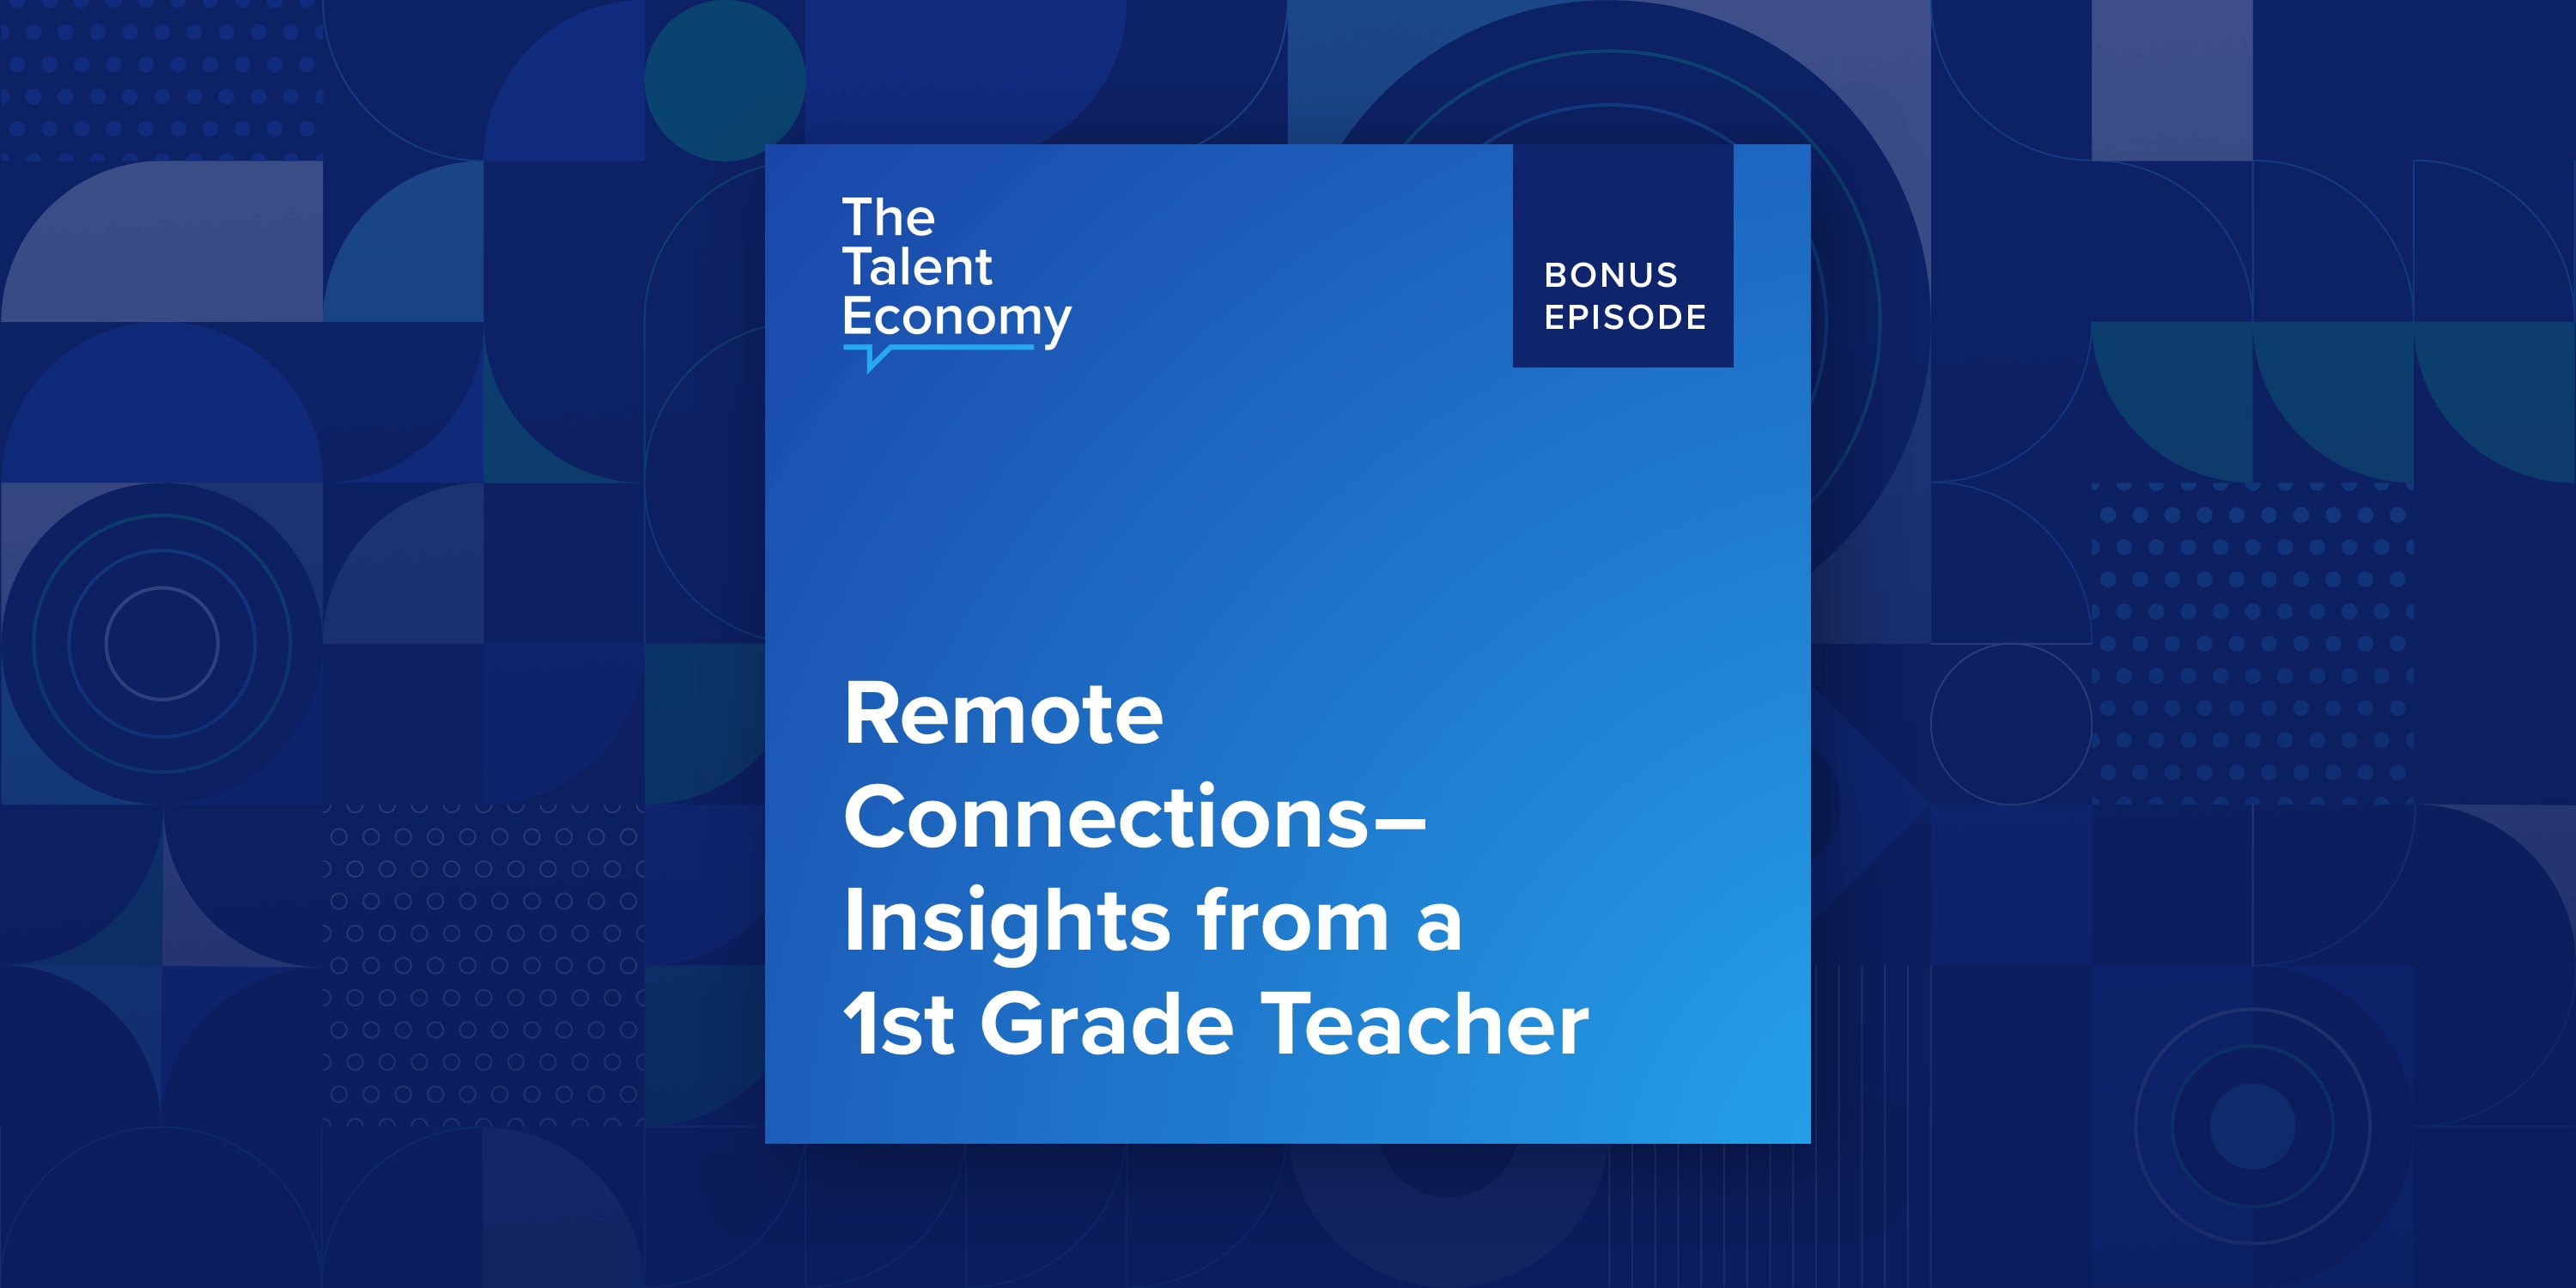 Remote Connections - Insights from a 1st Grade Teacher